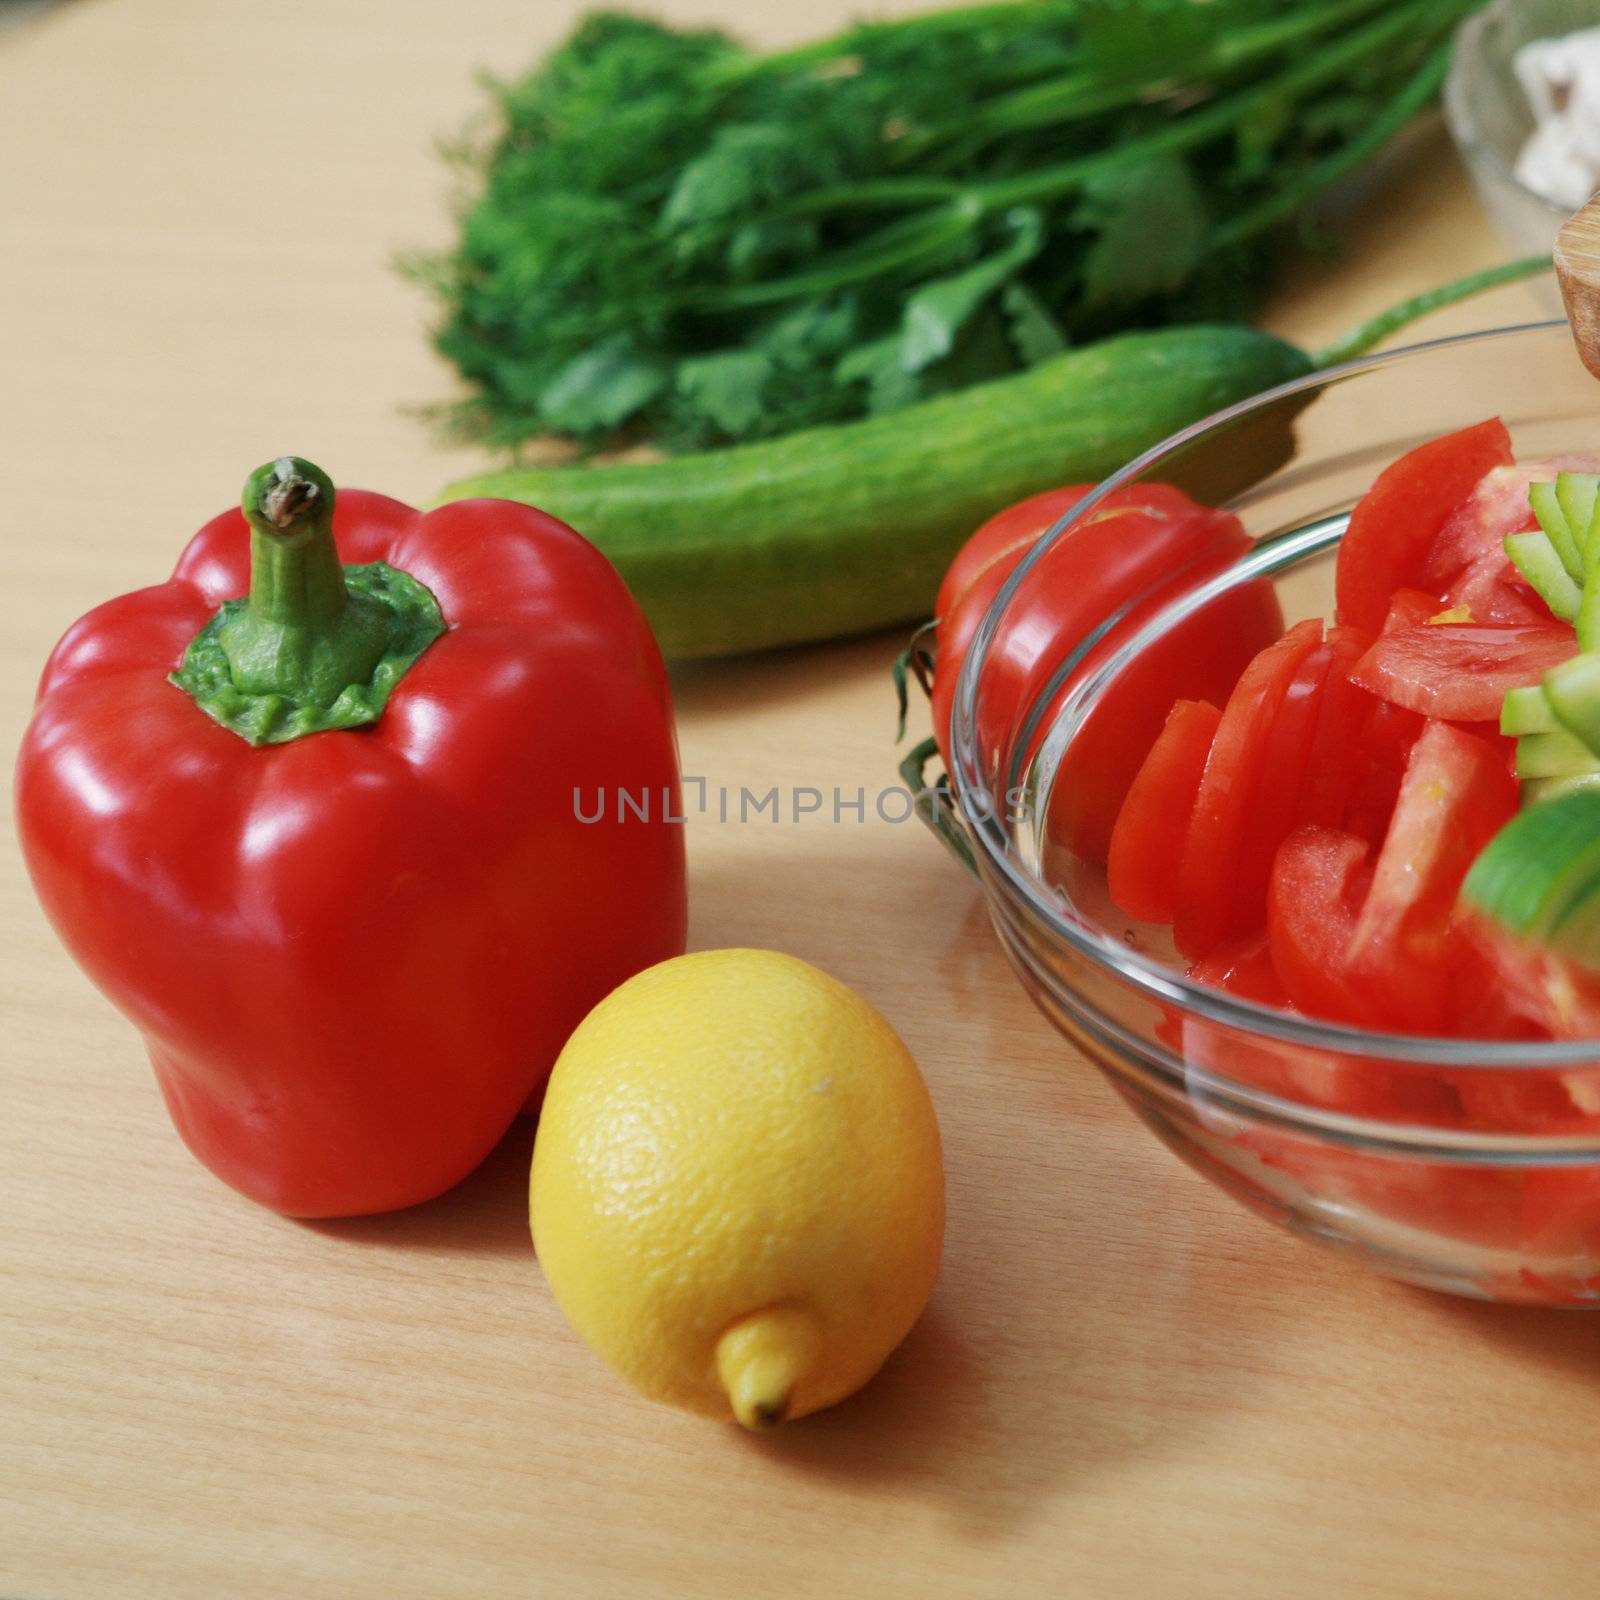 An image of bright vegetables on the table